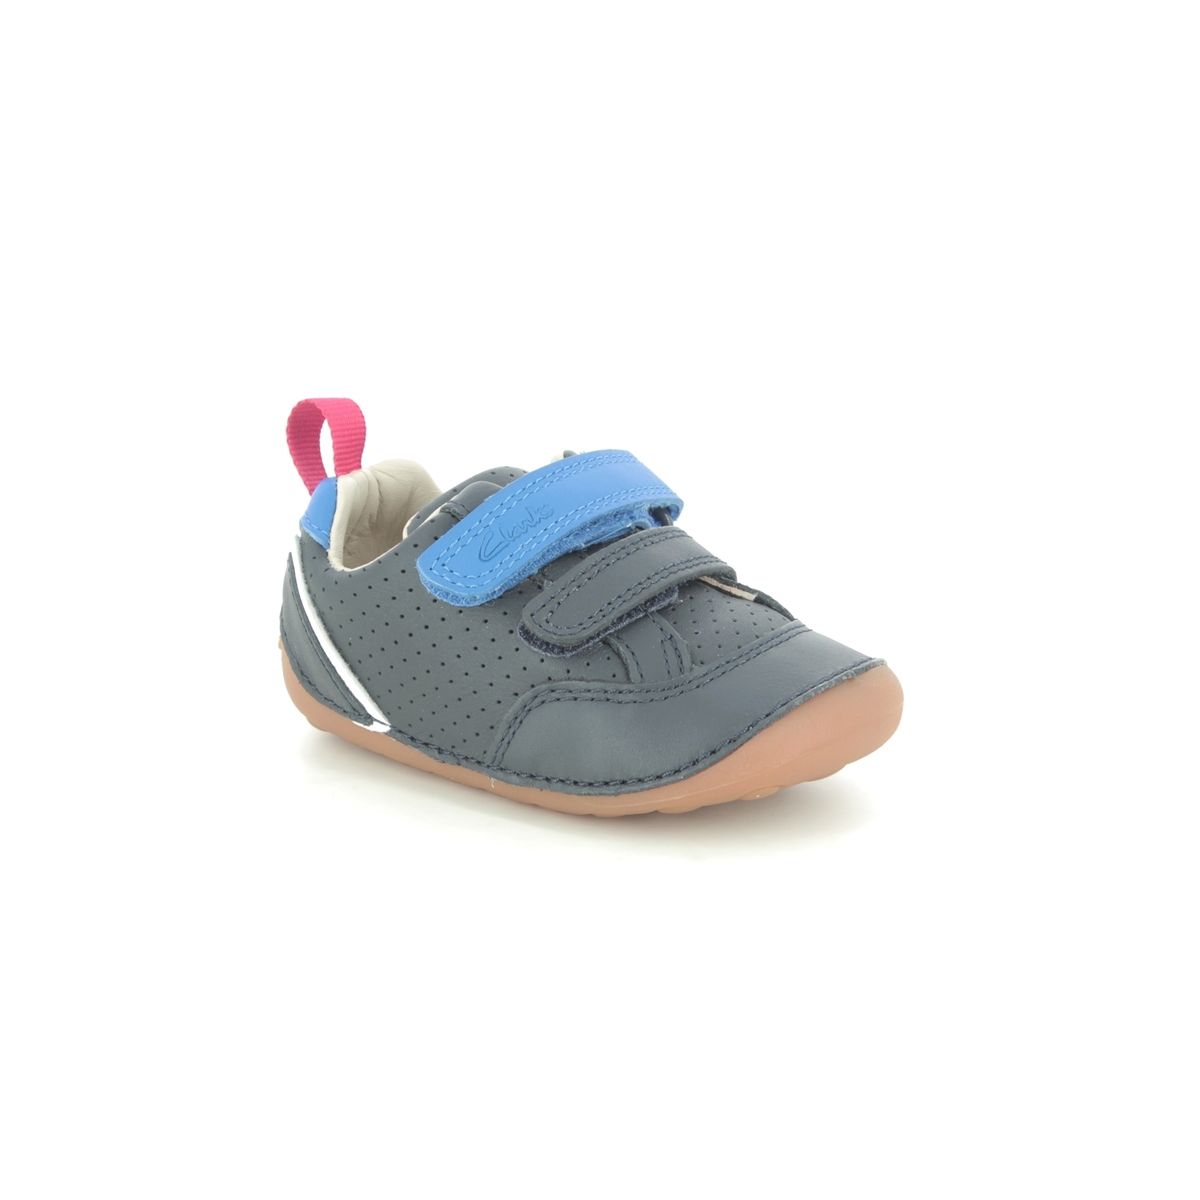 Clarks Tiny Sky T Navy Leather Kids Boys First And Toddler 576297G In Size 5.5 In Plain Navy Leather G Width Fitting For kids